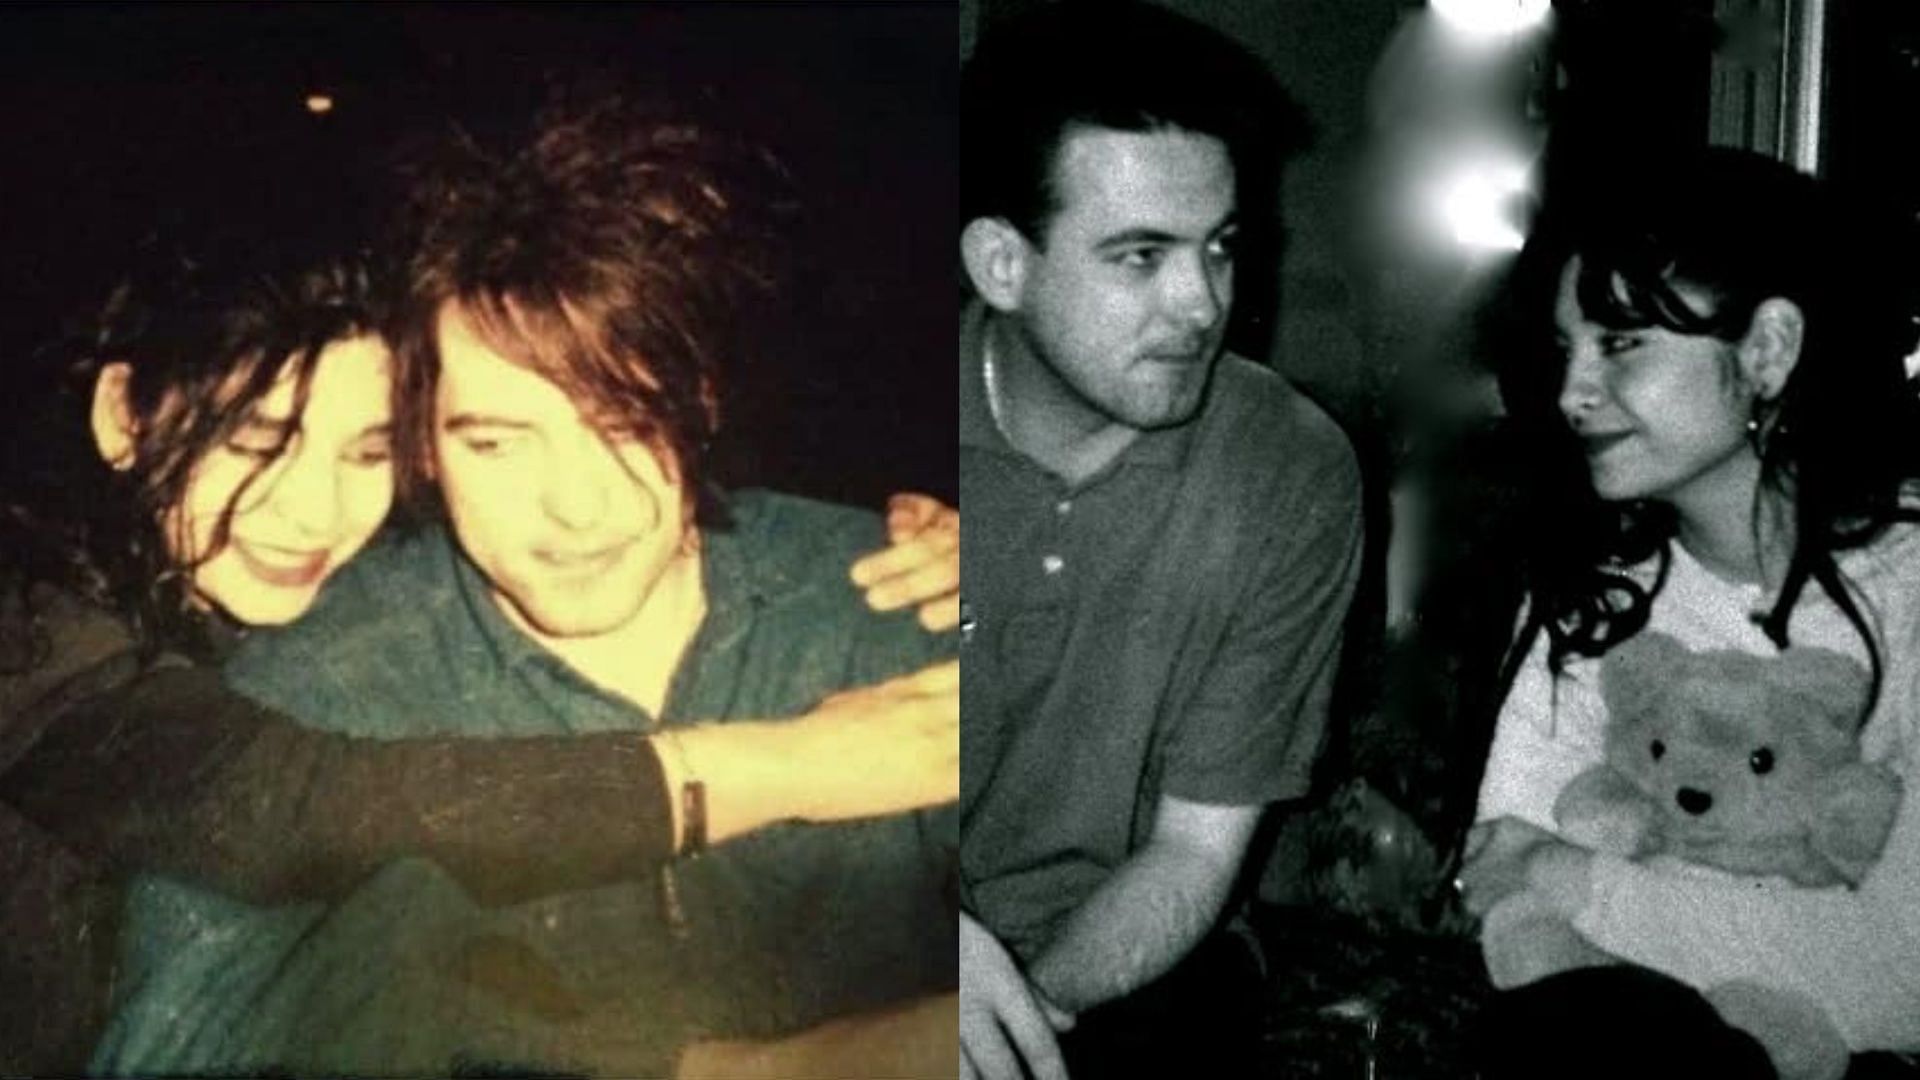 The Cure fans debunk Robert Smith grooming allegations (Images via Pinterest)